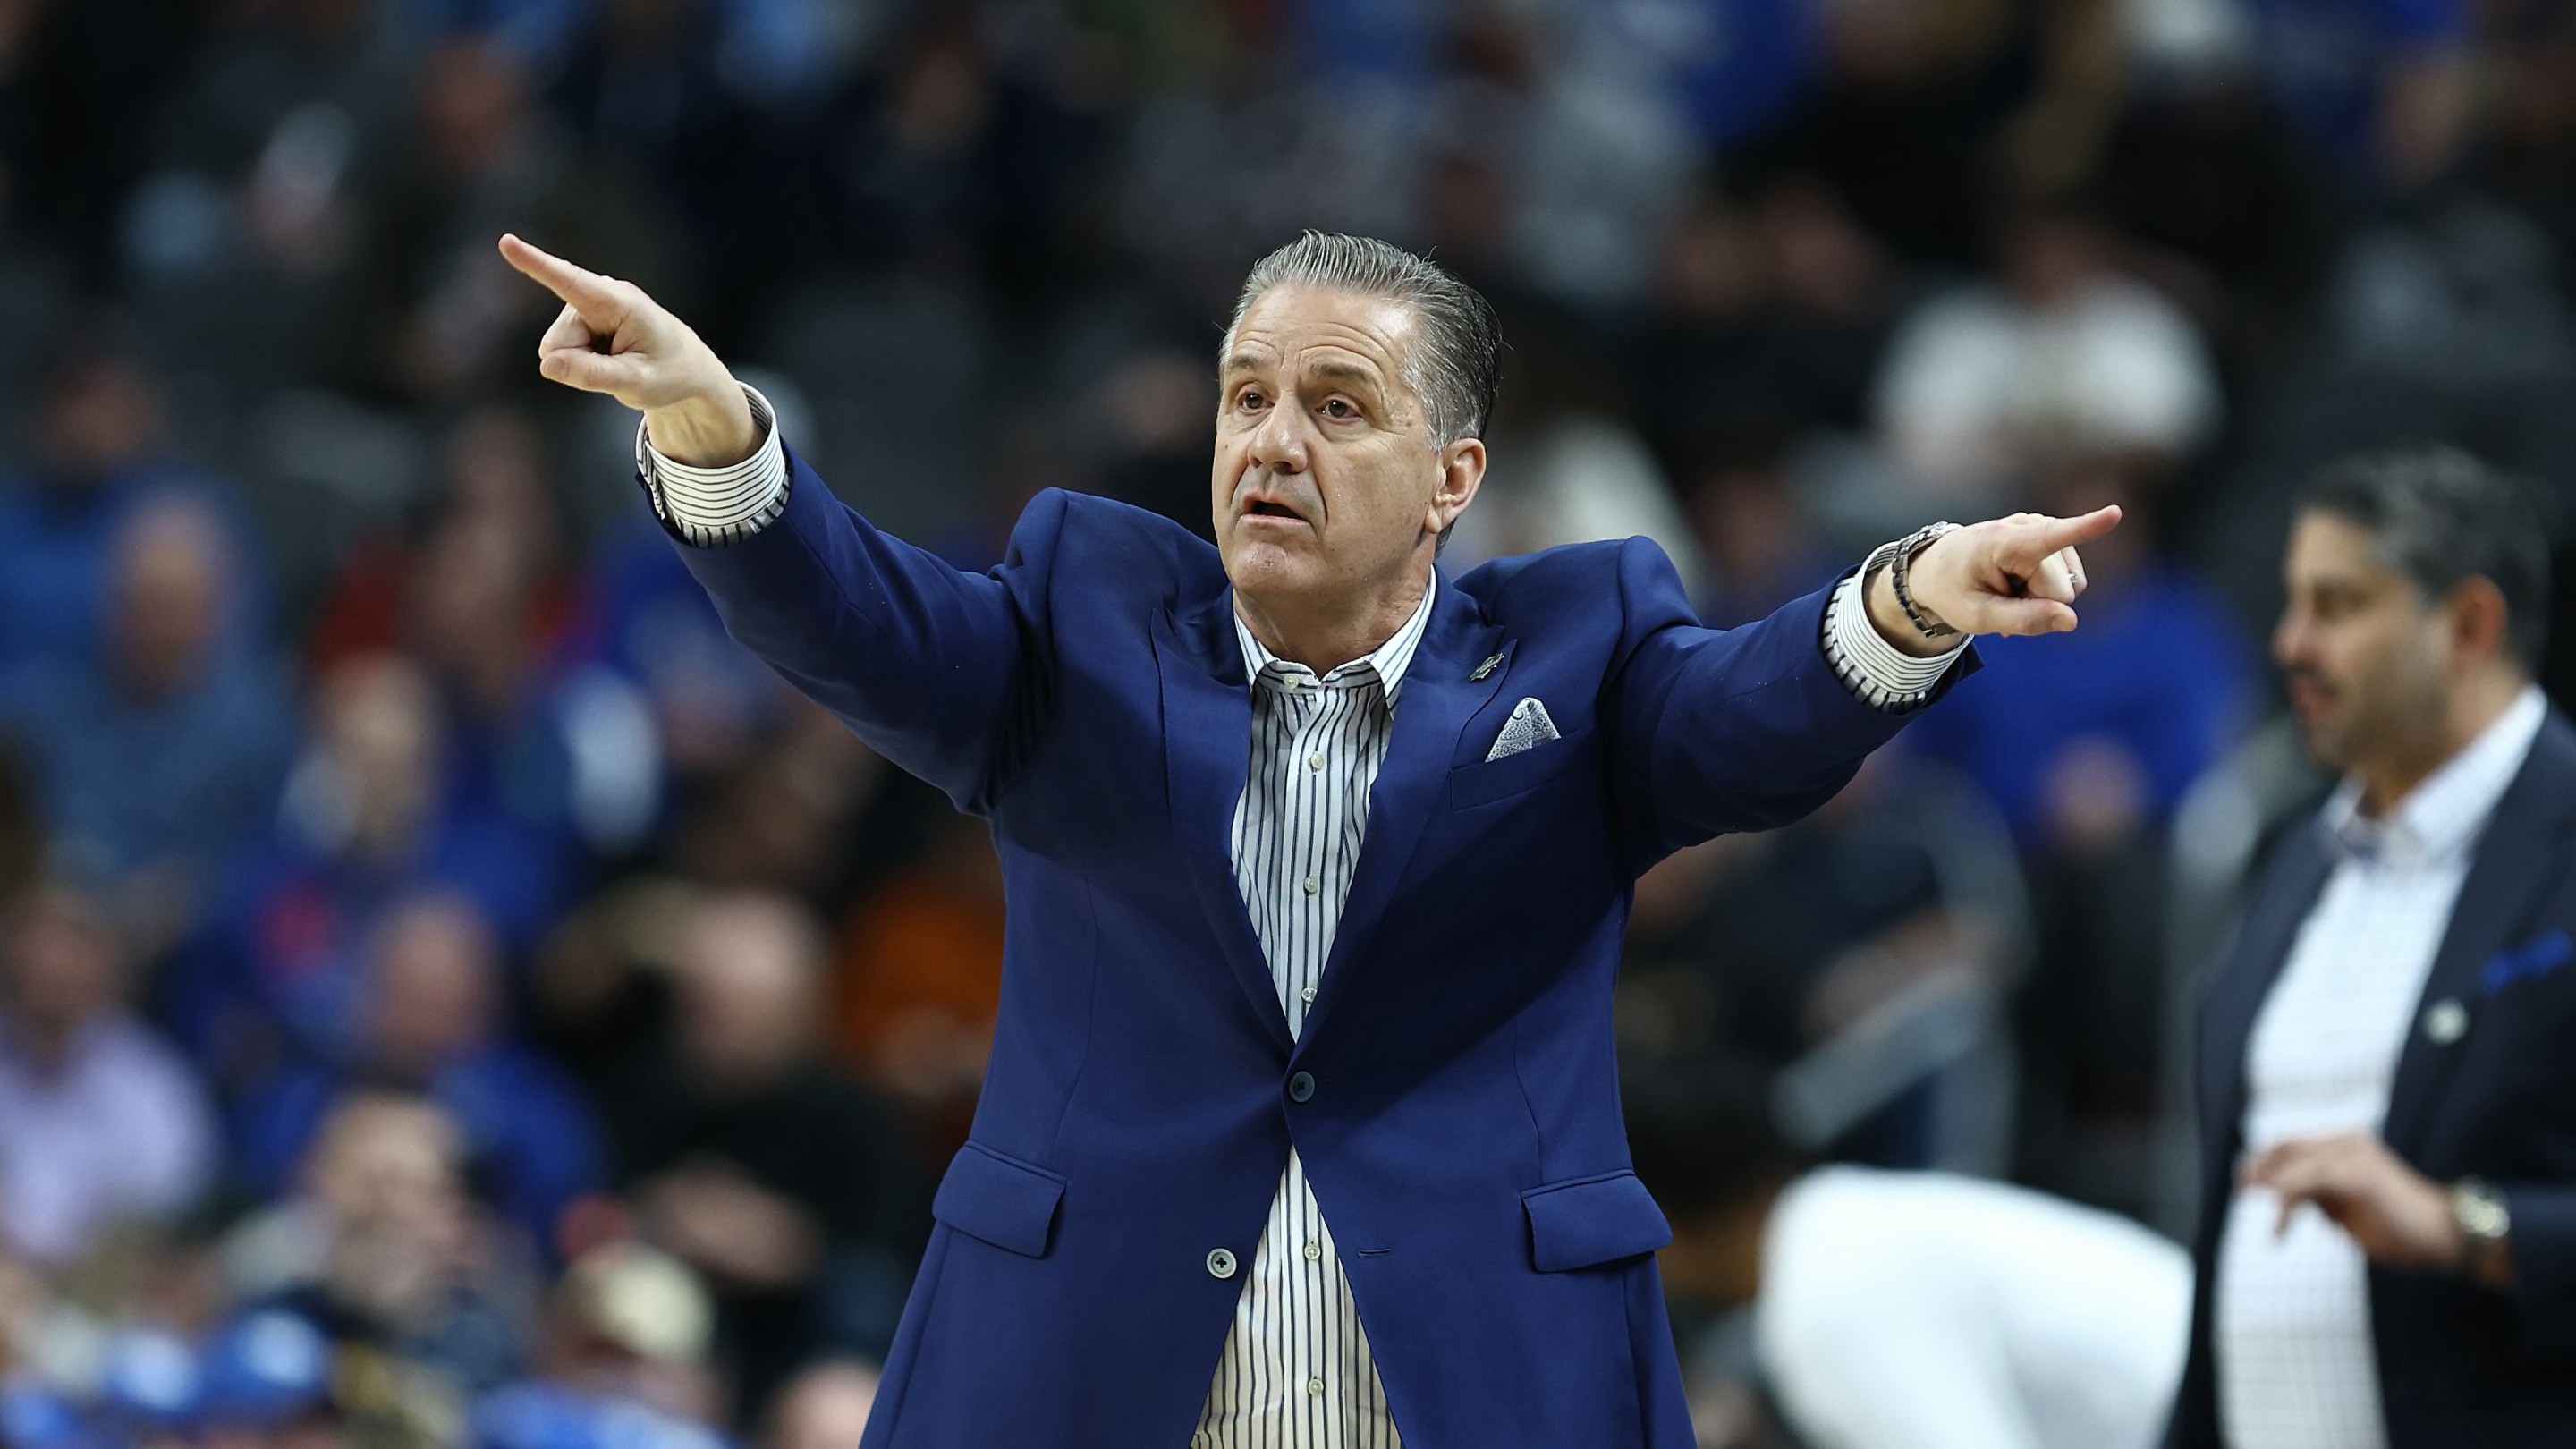 John Calipari Can't Stop to Chat While Pushing His Doggy Stroller